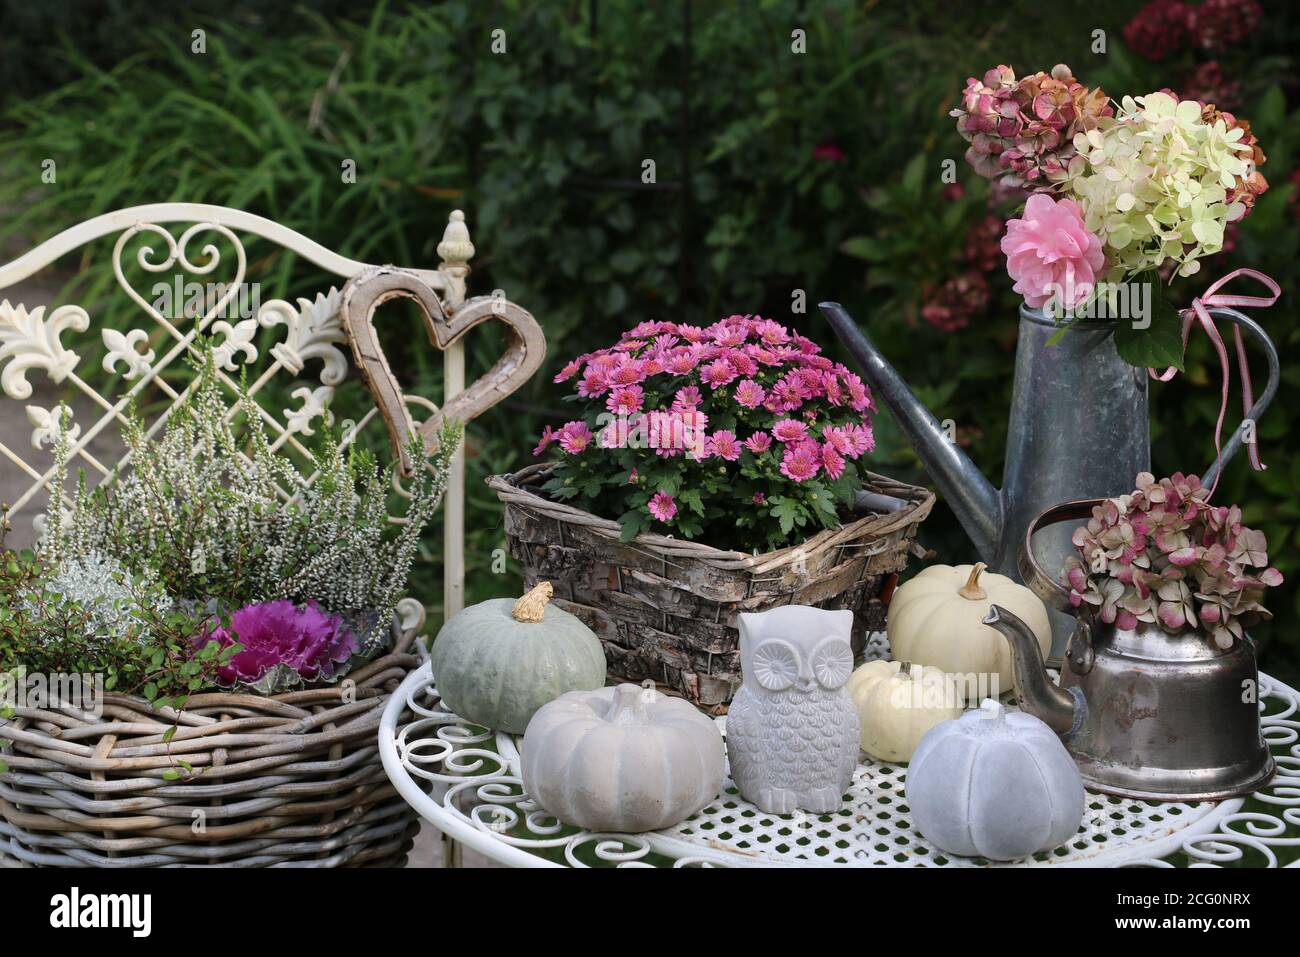 autumn garden decoration with flowers in basket, pumpkins and own figure Stock Photo